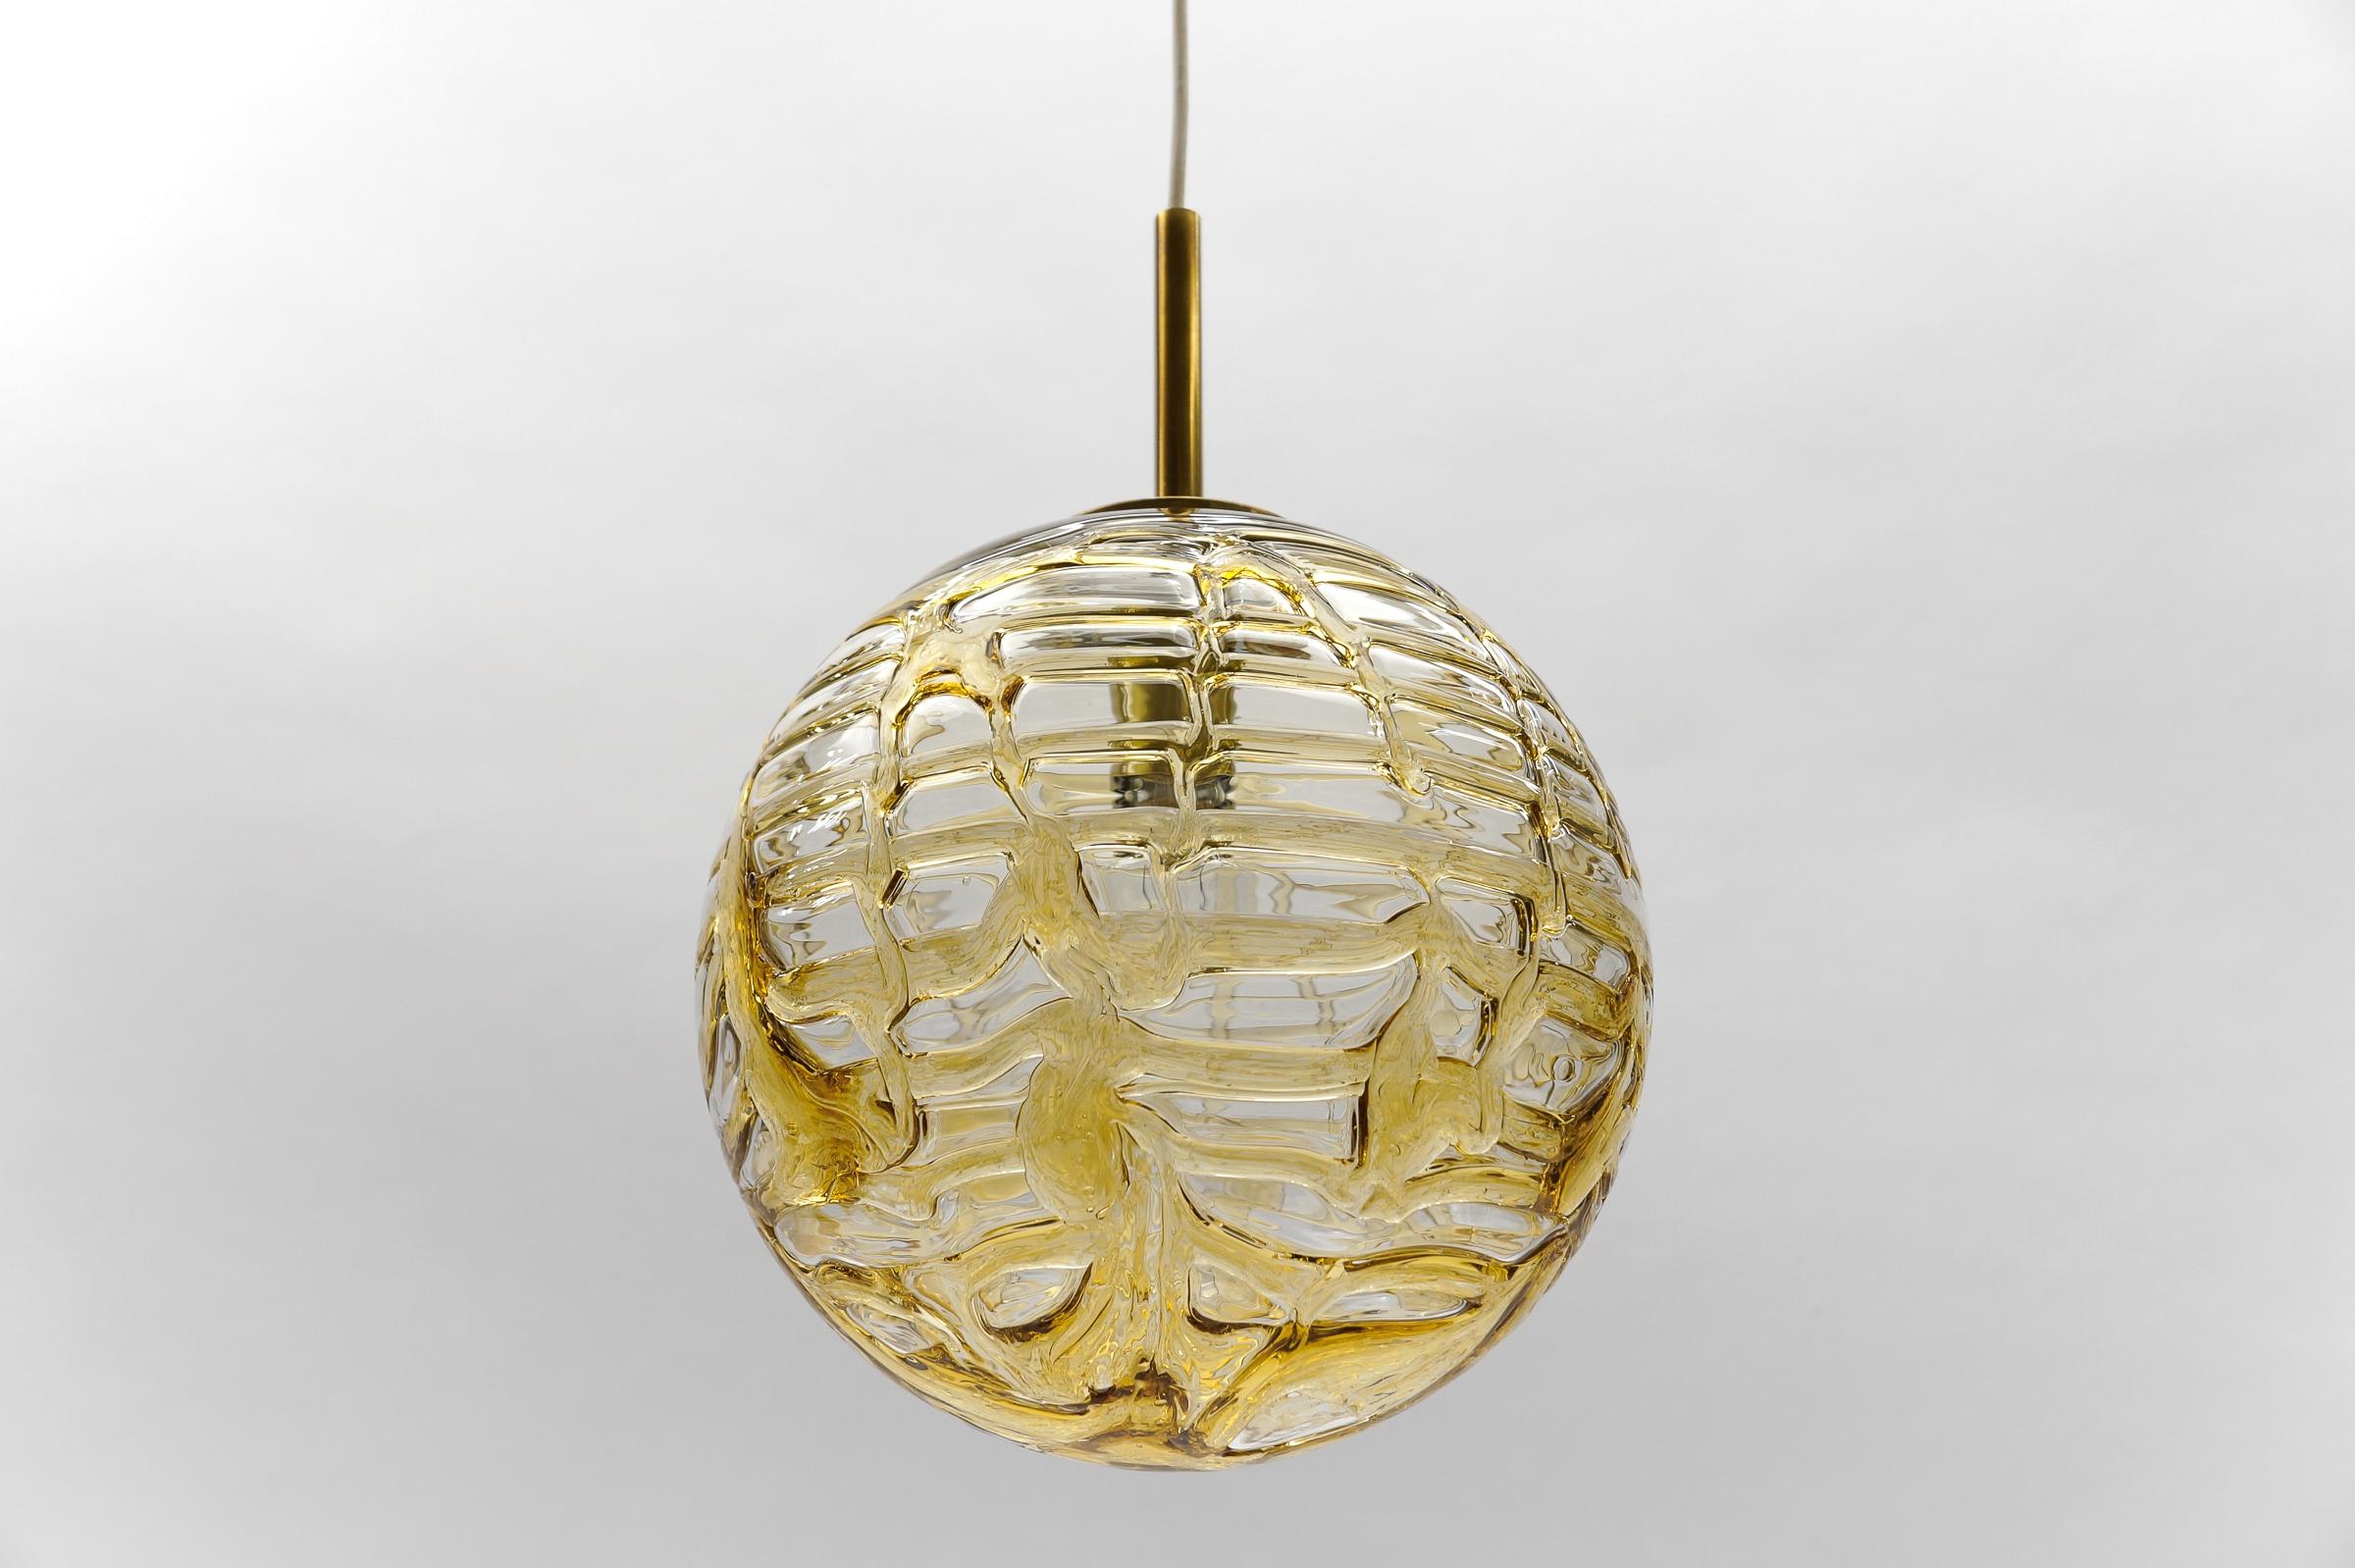 Lovely Yellow Murano Glass Ball Pendant Lamp by Doria, - 1960s Germany For Sale 2